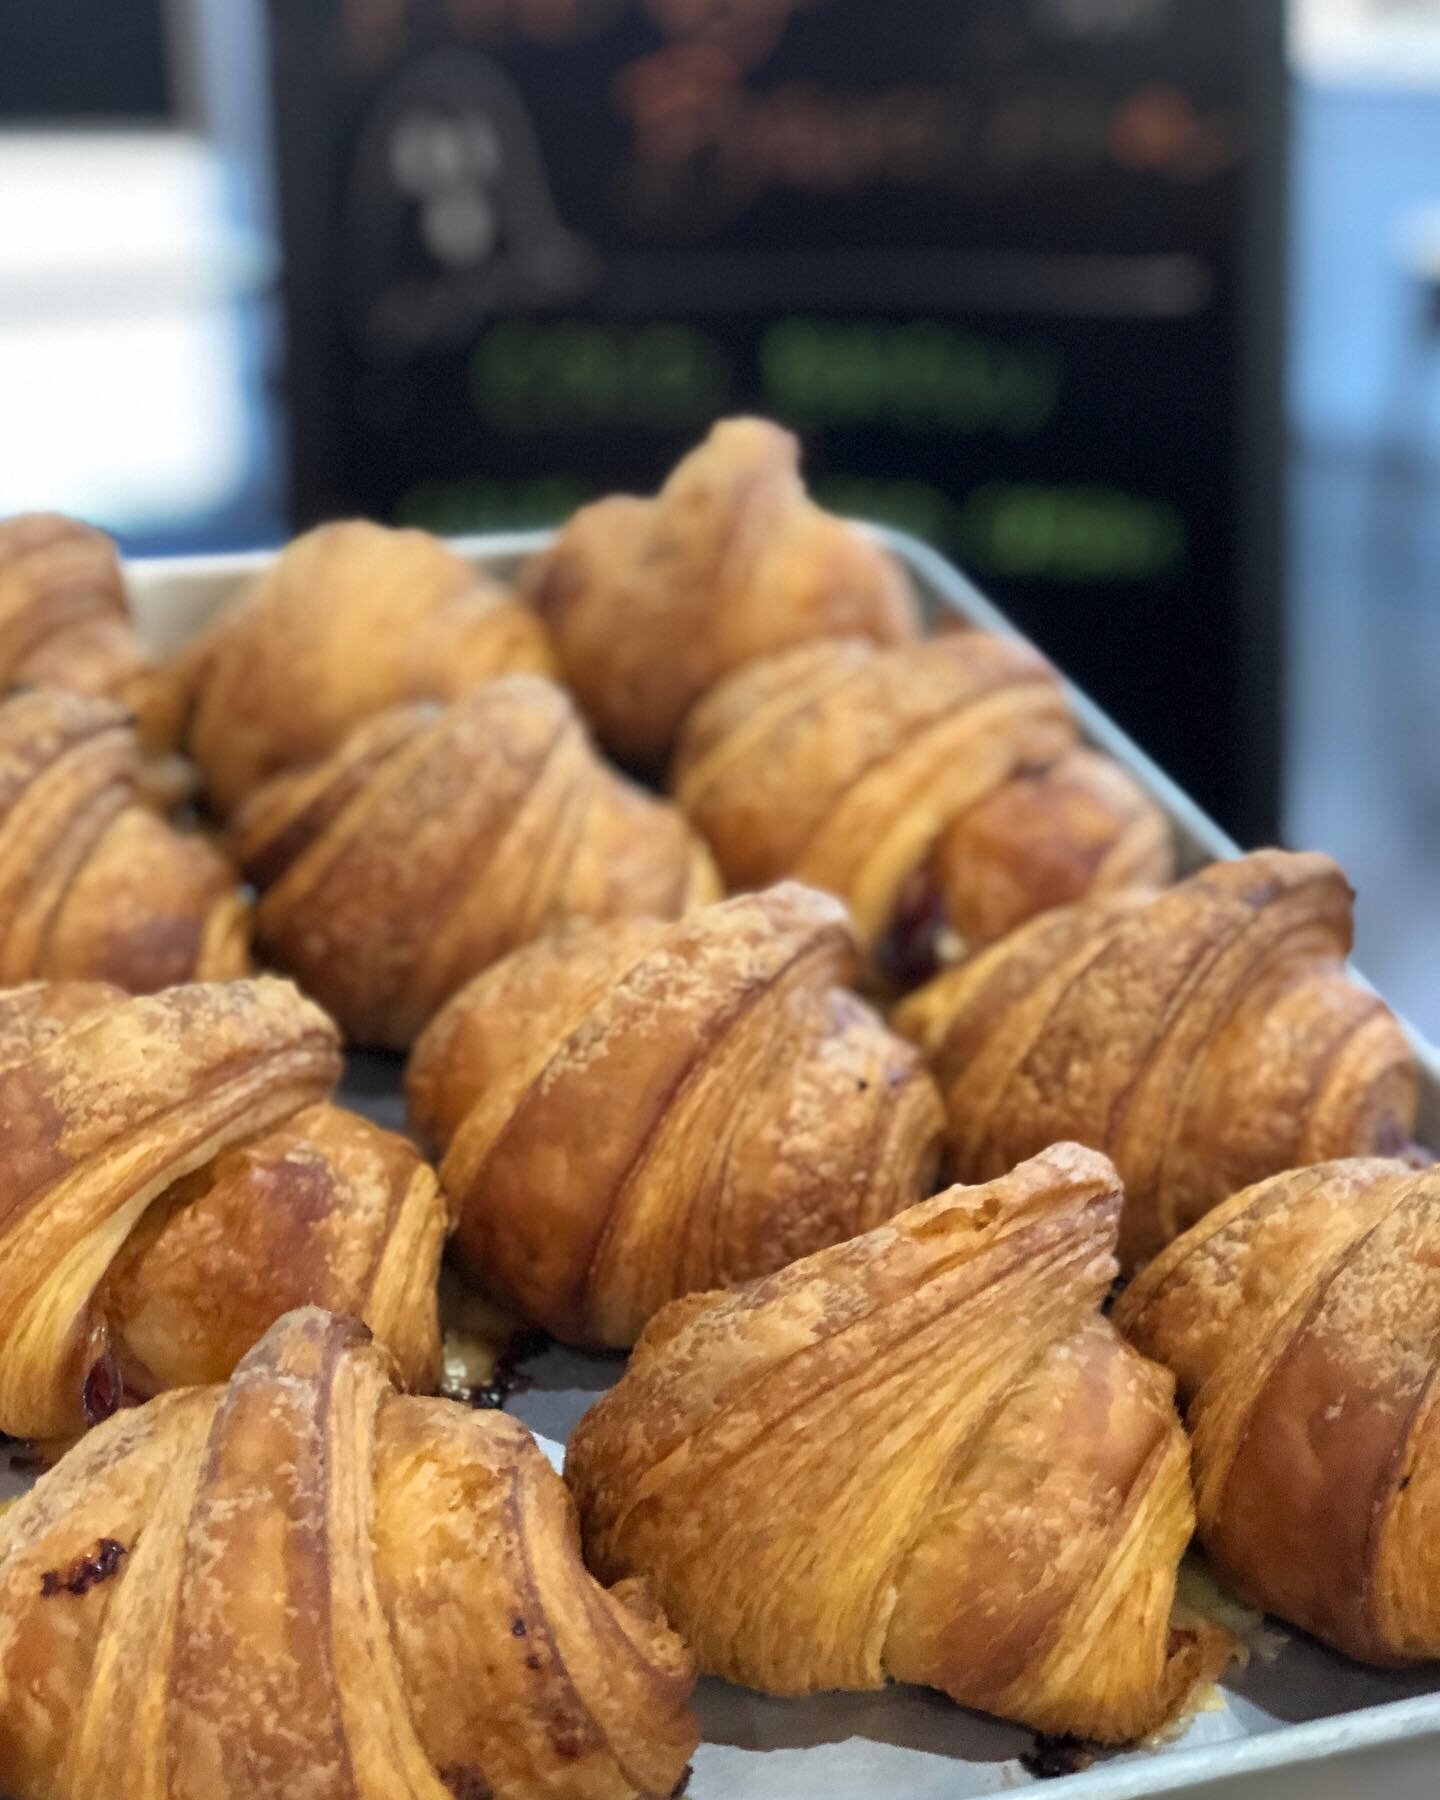 Every pastry we sell is made in house, with the exception of our croissants. Those come from @dozenbakerynashville because, well, we know the best when we see it. Ham &amp; Cheese/Chocolate are available at both locations every Friday, Saturday and S